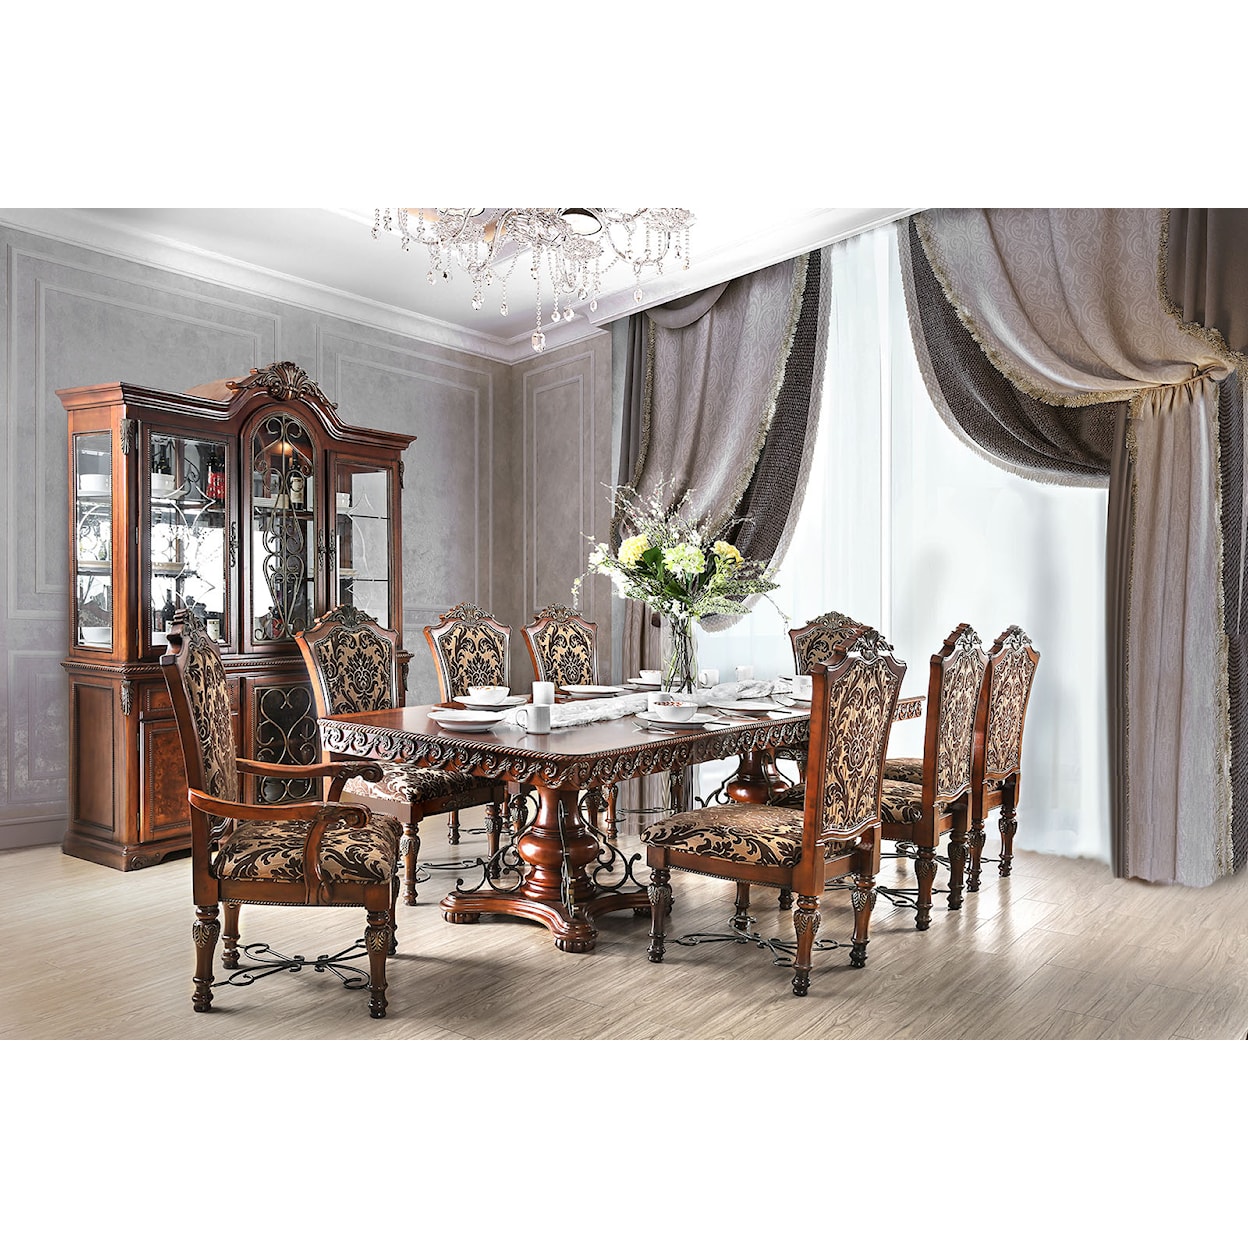 Furniture of America Lucie 7-Piece Dining Table Set